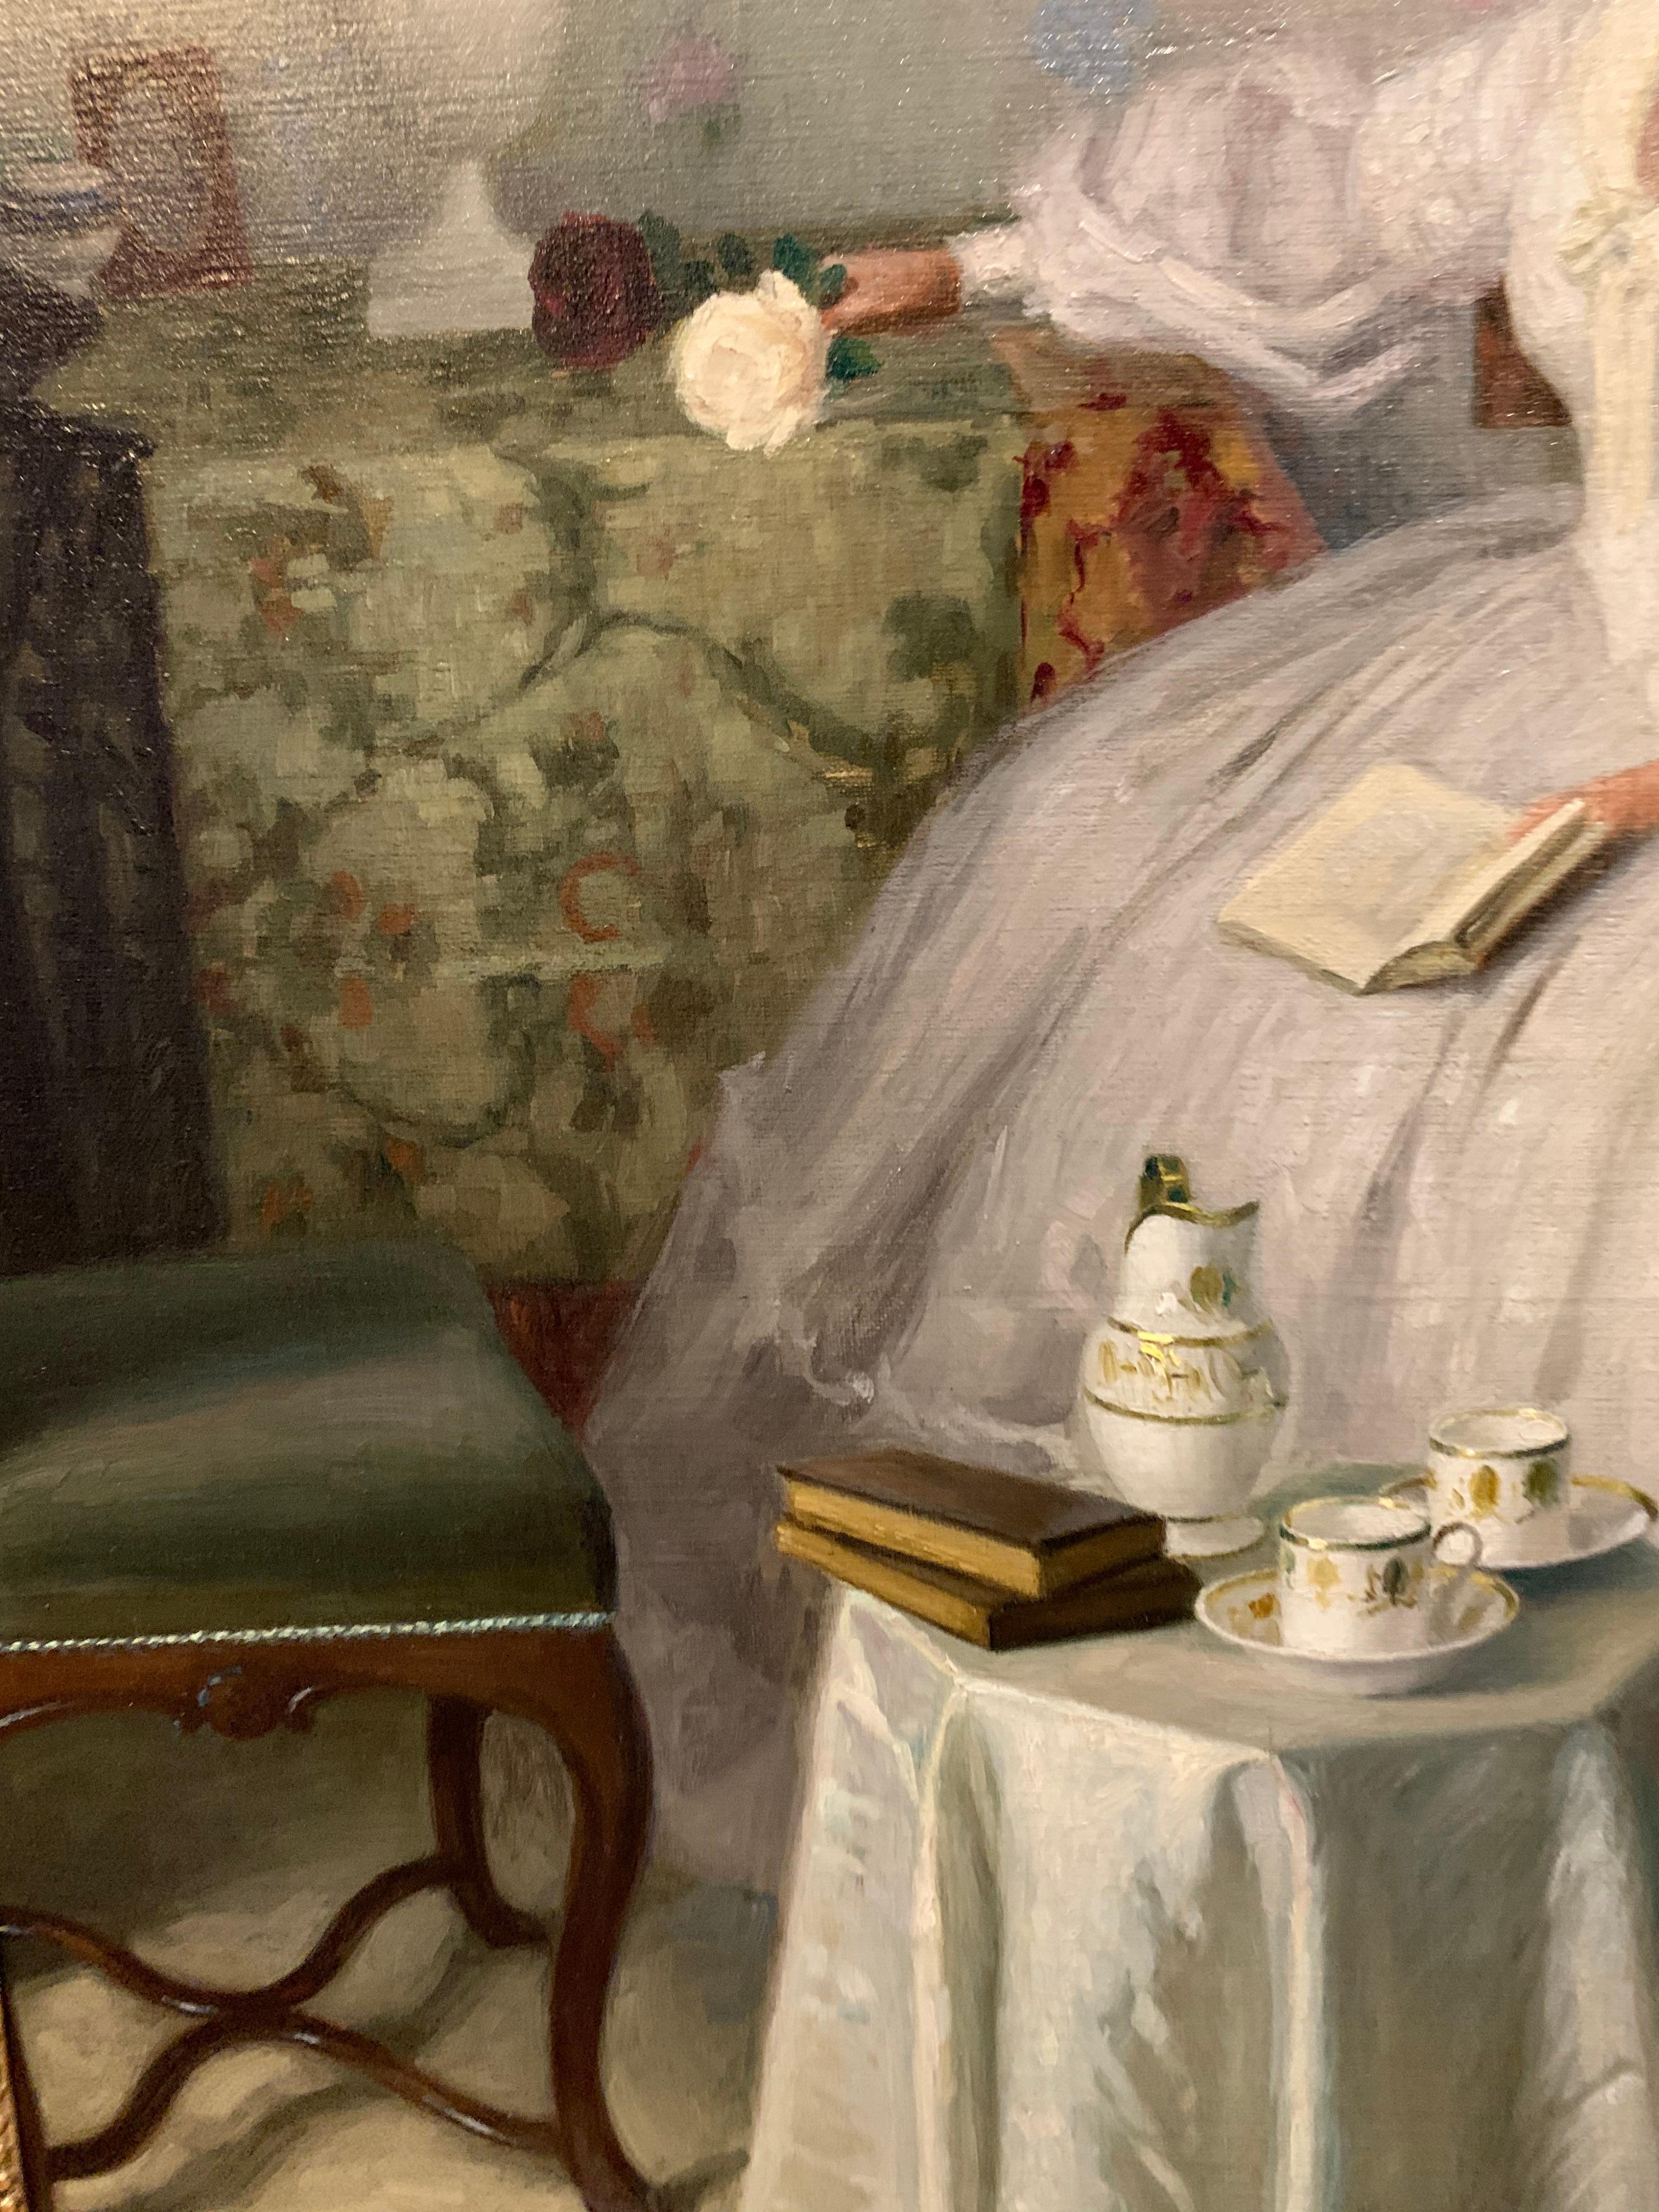 German impressionist artist Paul Ehrhardt, 1972-1959, paints a high aristocratic woman in interior wearing a white, satin lace dress and is reading a book. Beside her is a flower vase with roses, In front of her is a tea set on a small round table